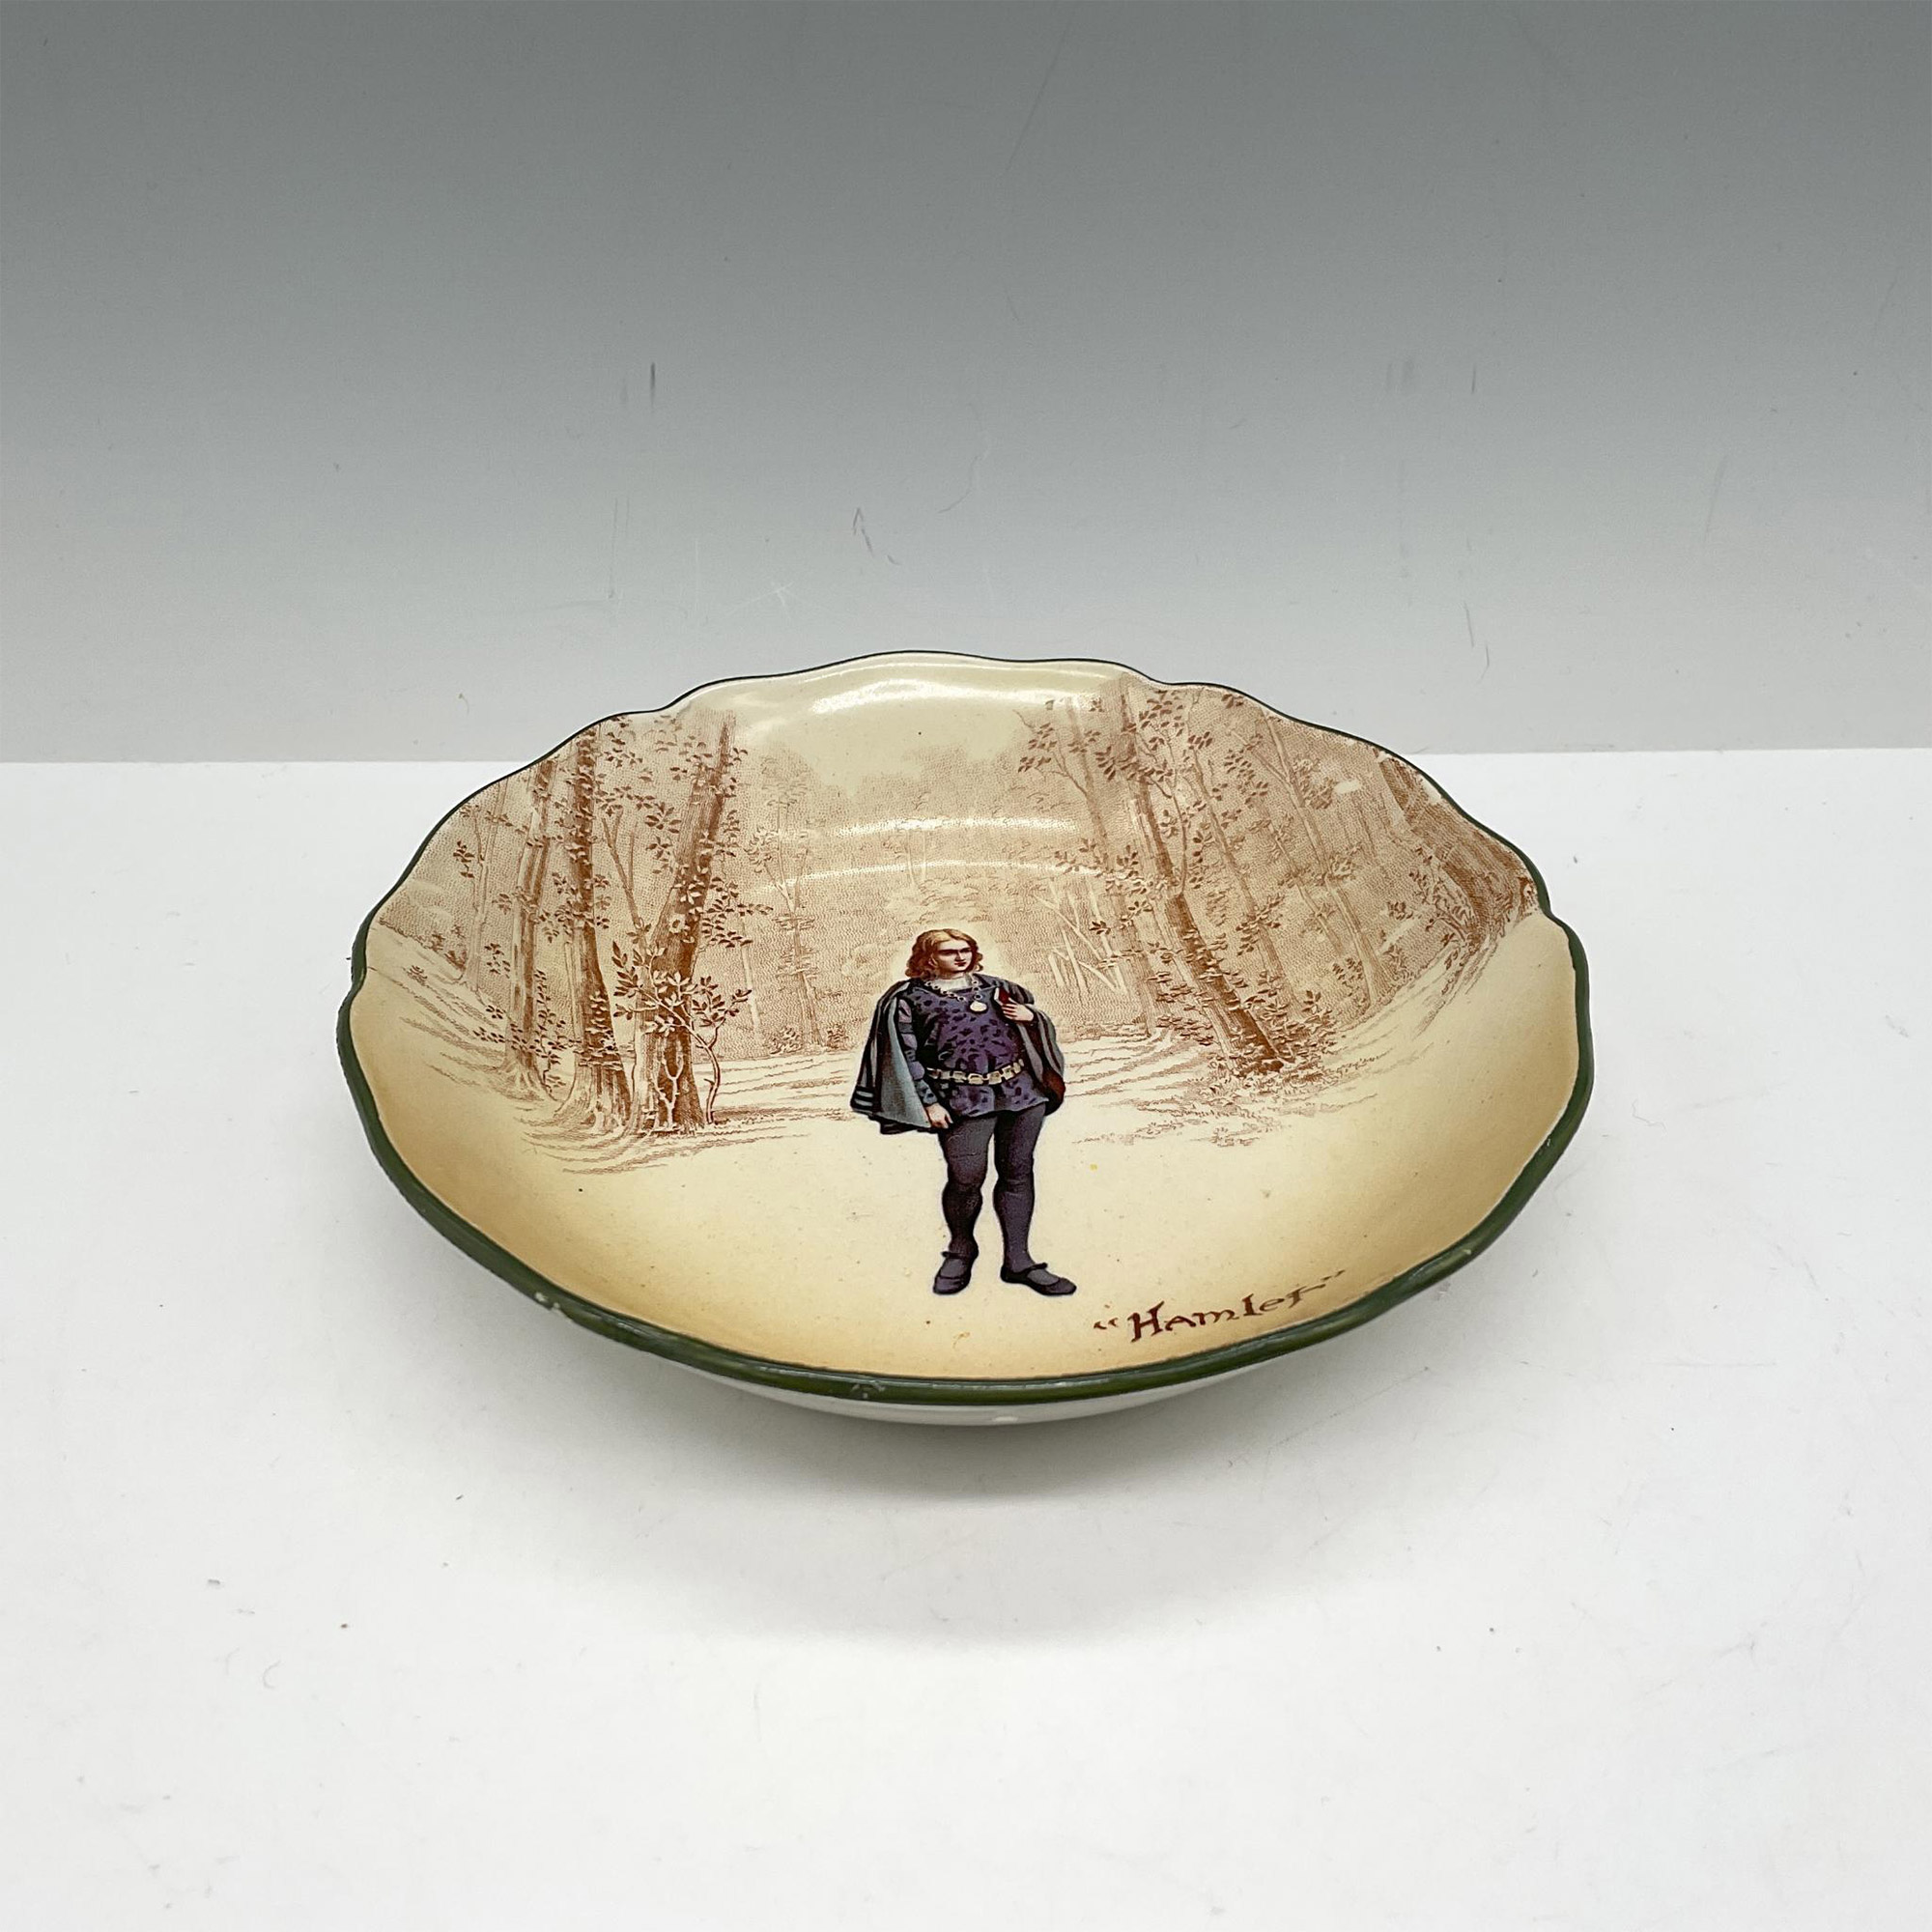 Royal Doulton Shakespeare Series Ware Bowl, Hamlet D3746 - Image 2 of 3